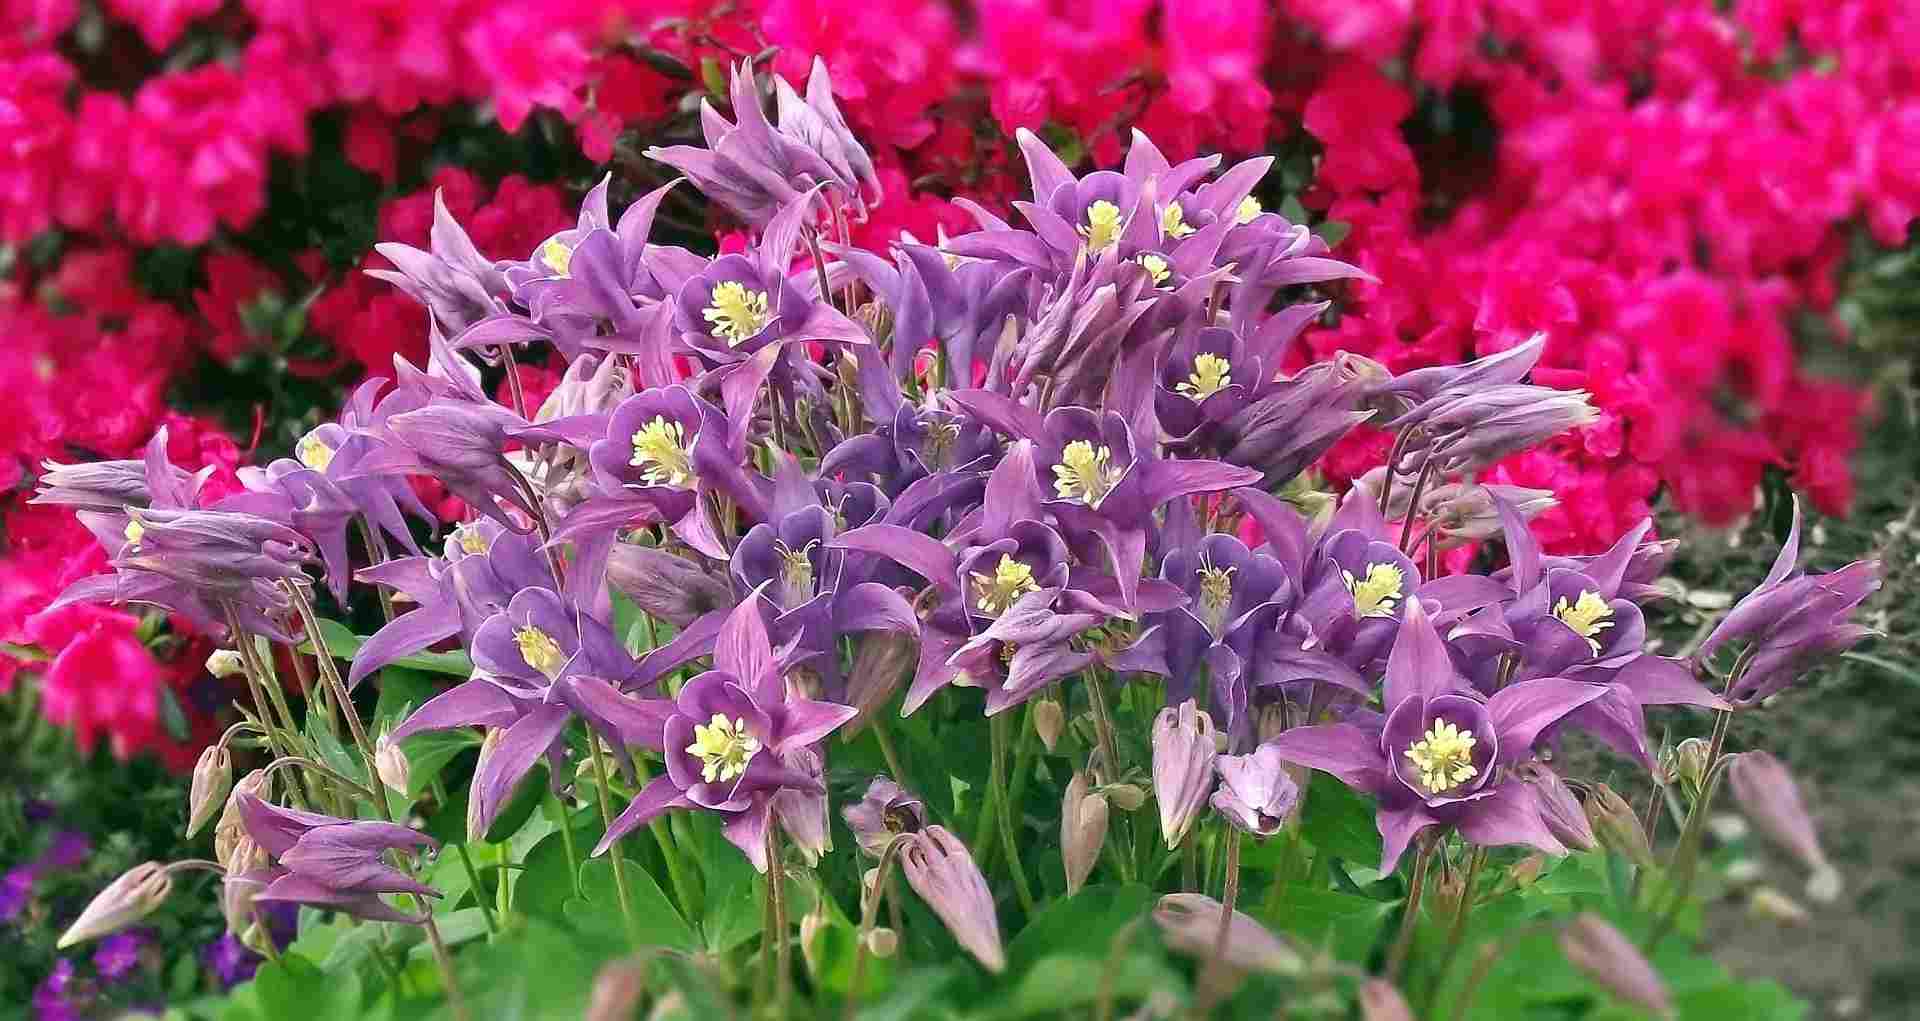 They belong to the Aquilegia genus of the family Ranunculaceae